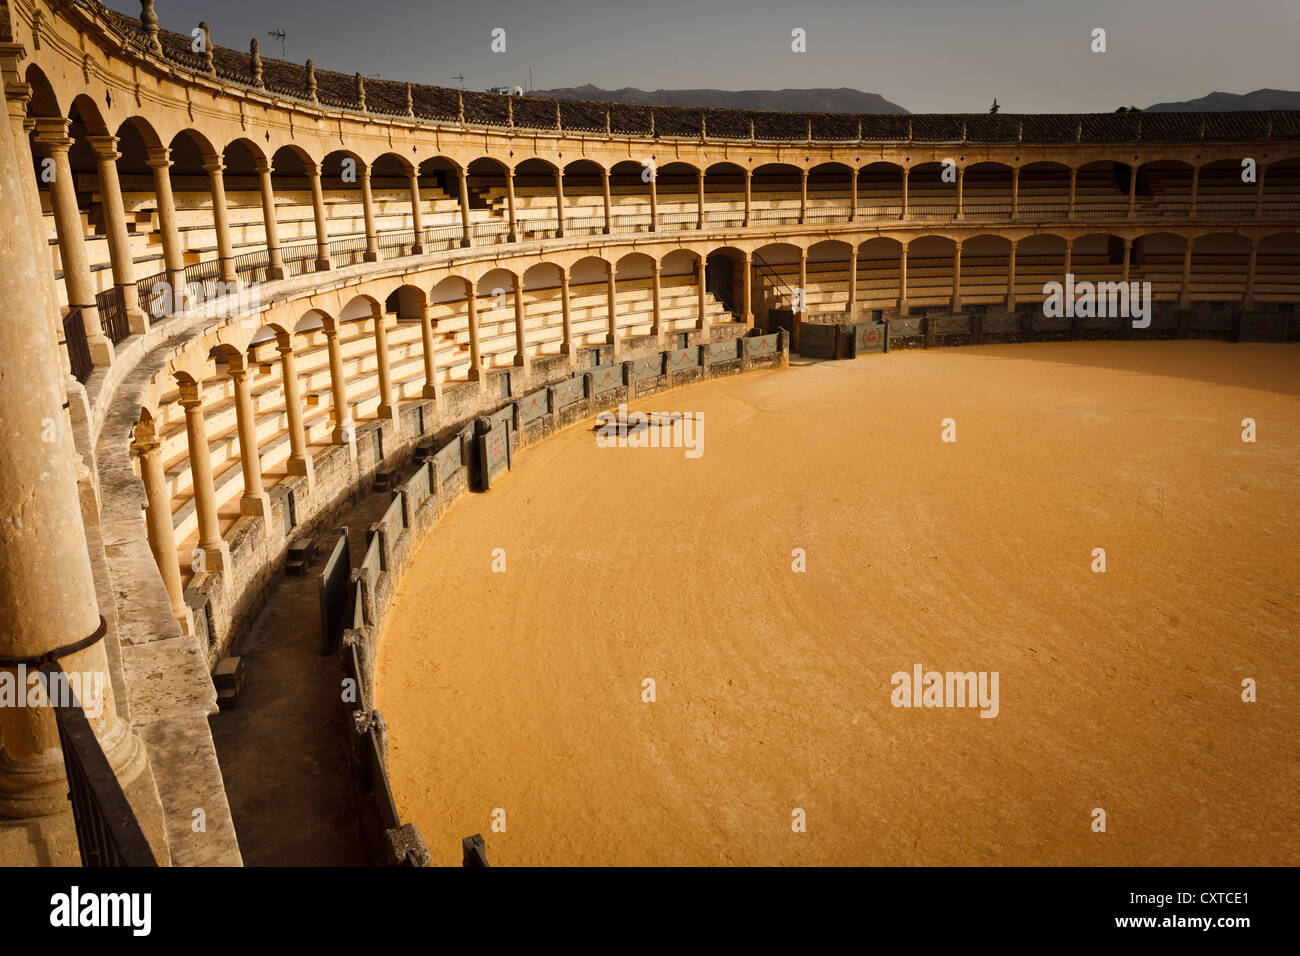 Interior view from the top of the sunlit side of the empty bullfight arena in Ronda, Spain Stock Photo